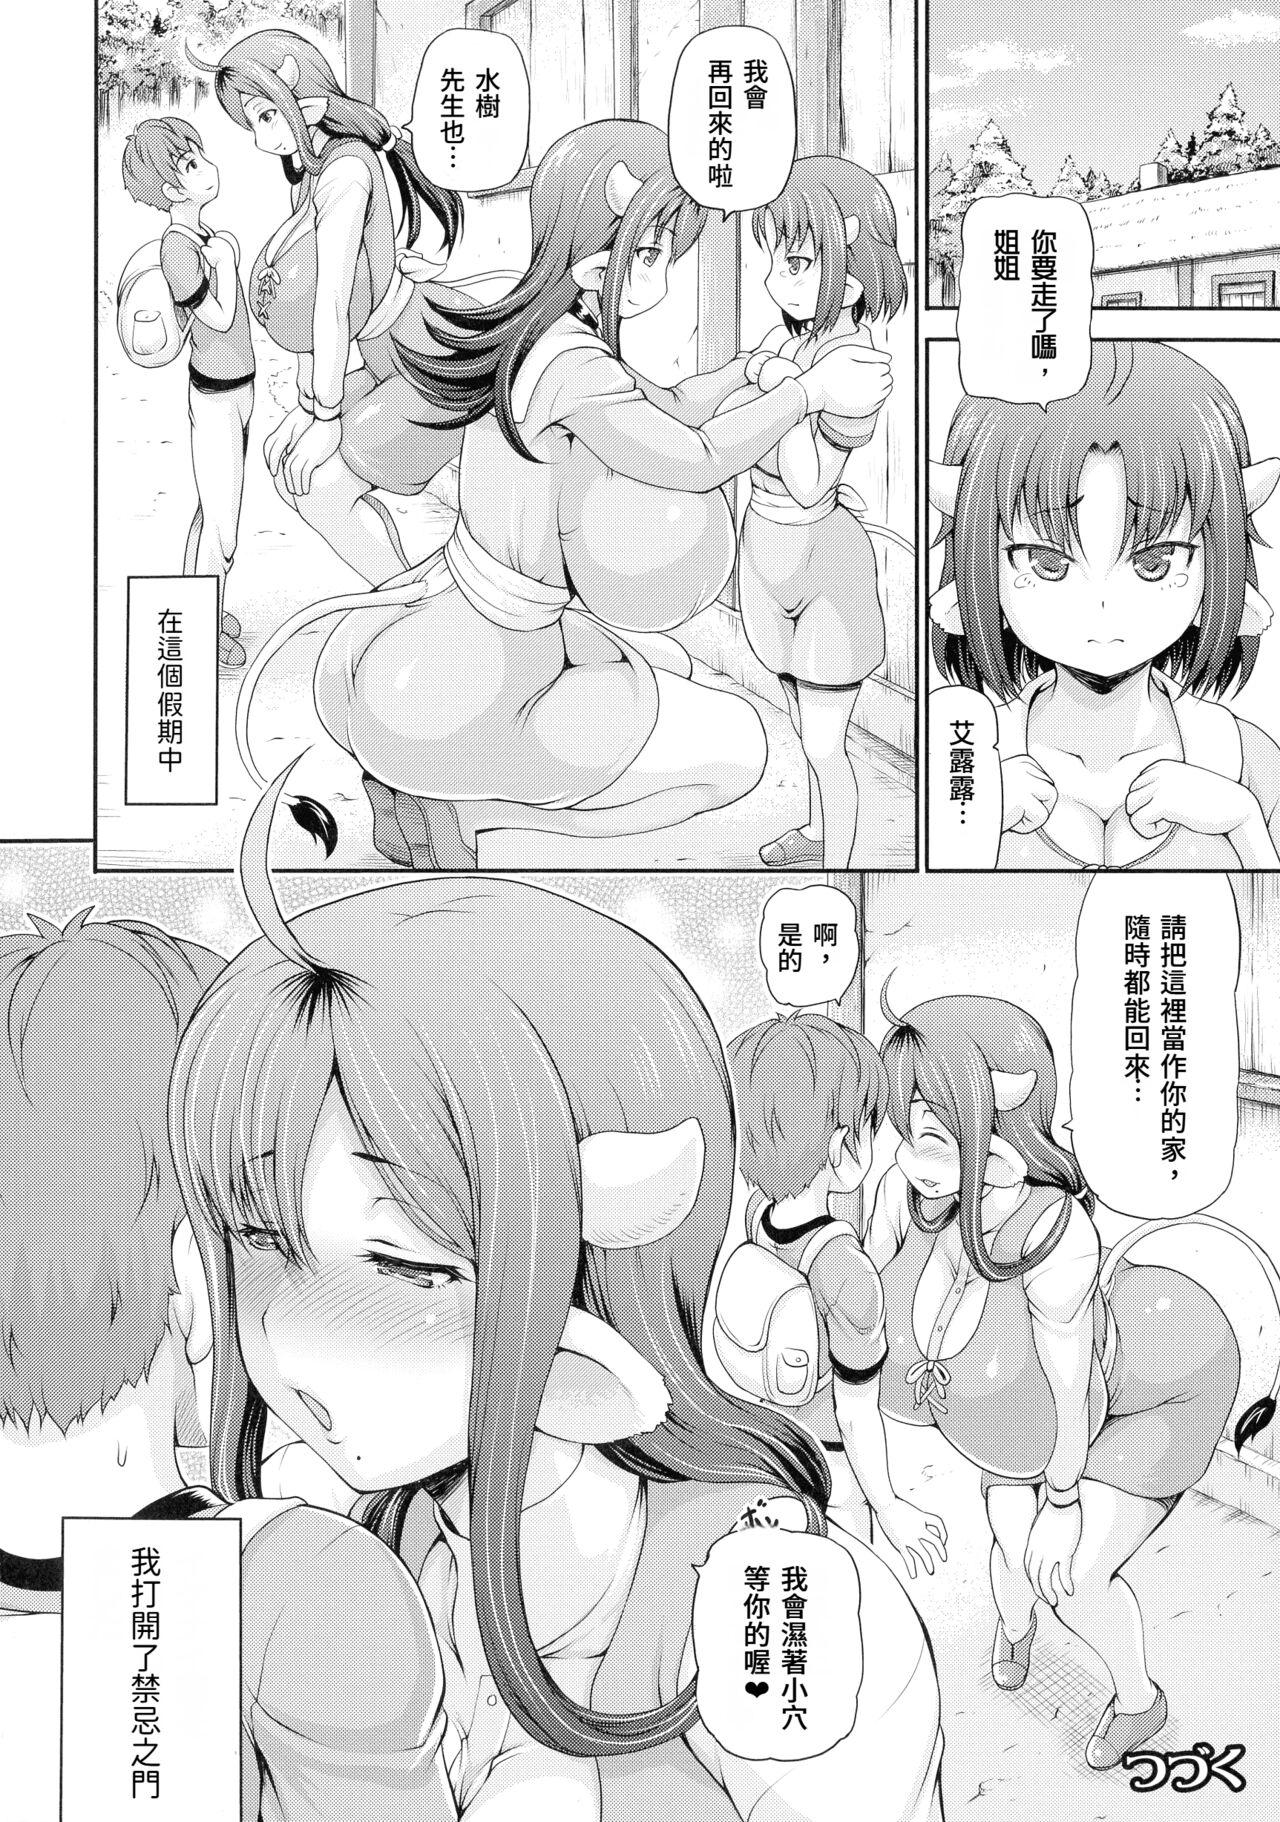 Doggystyle Porn Isekai Shoukan 2 Ch. 1-3 Black Hair - Page 66